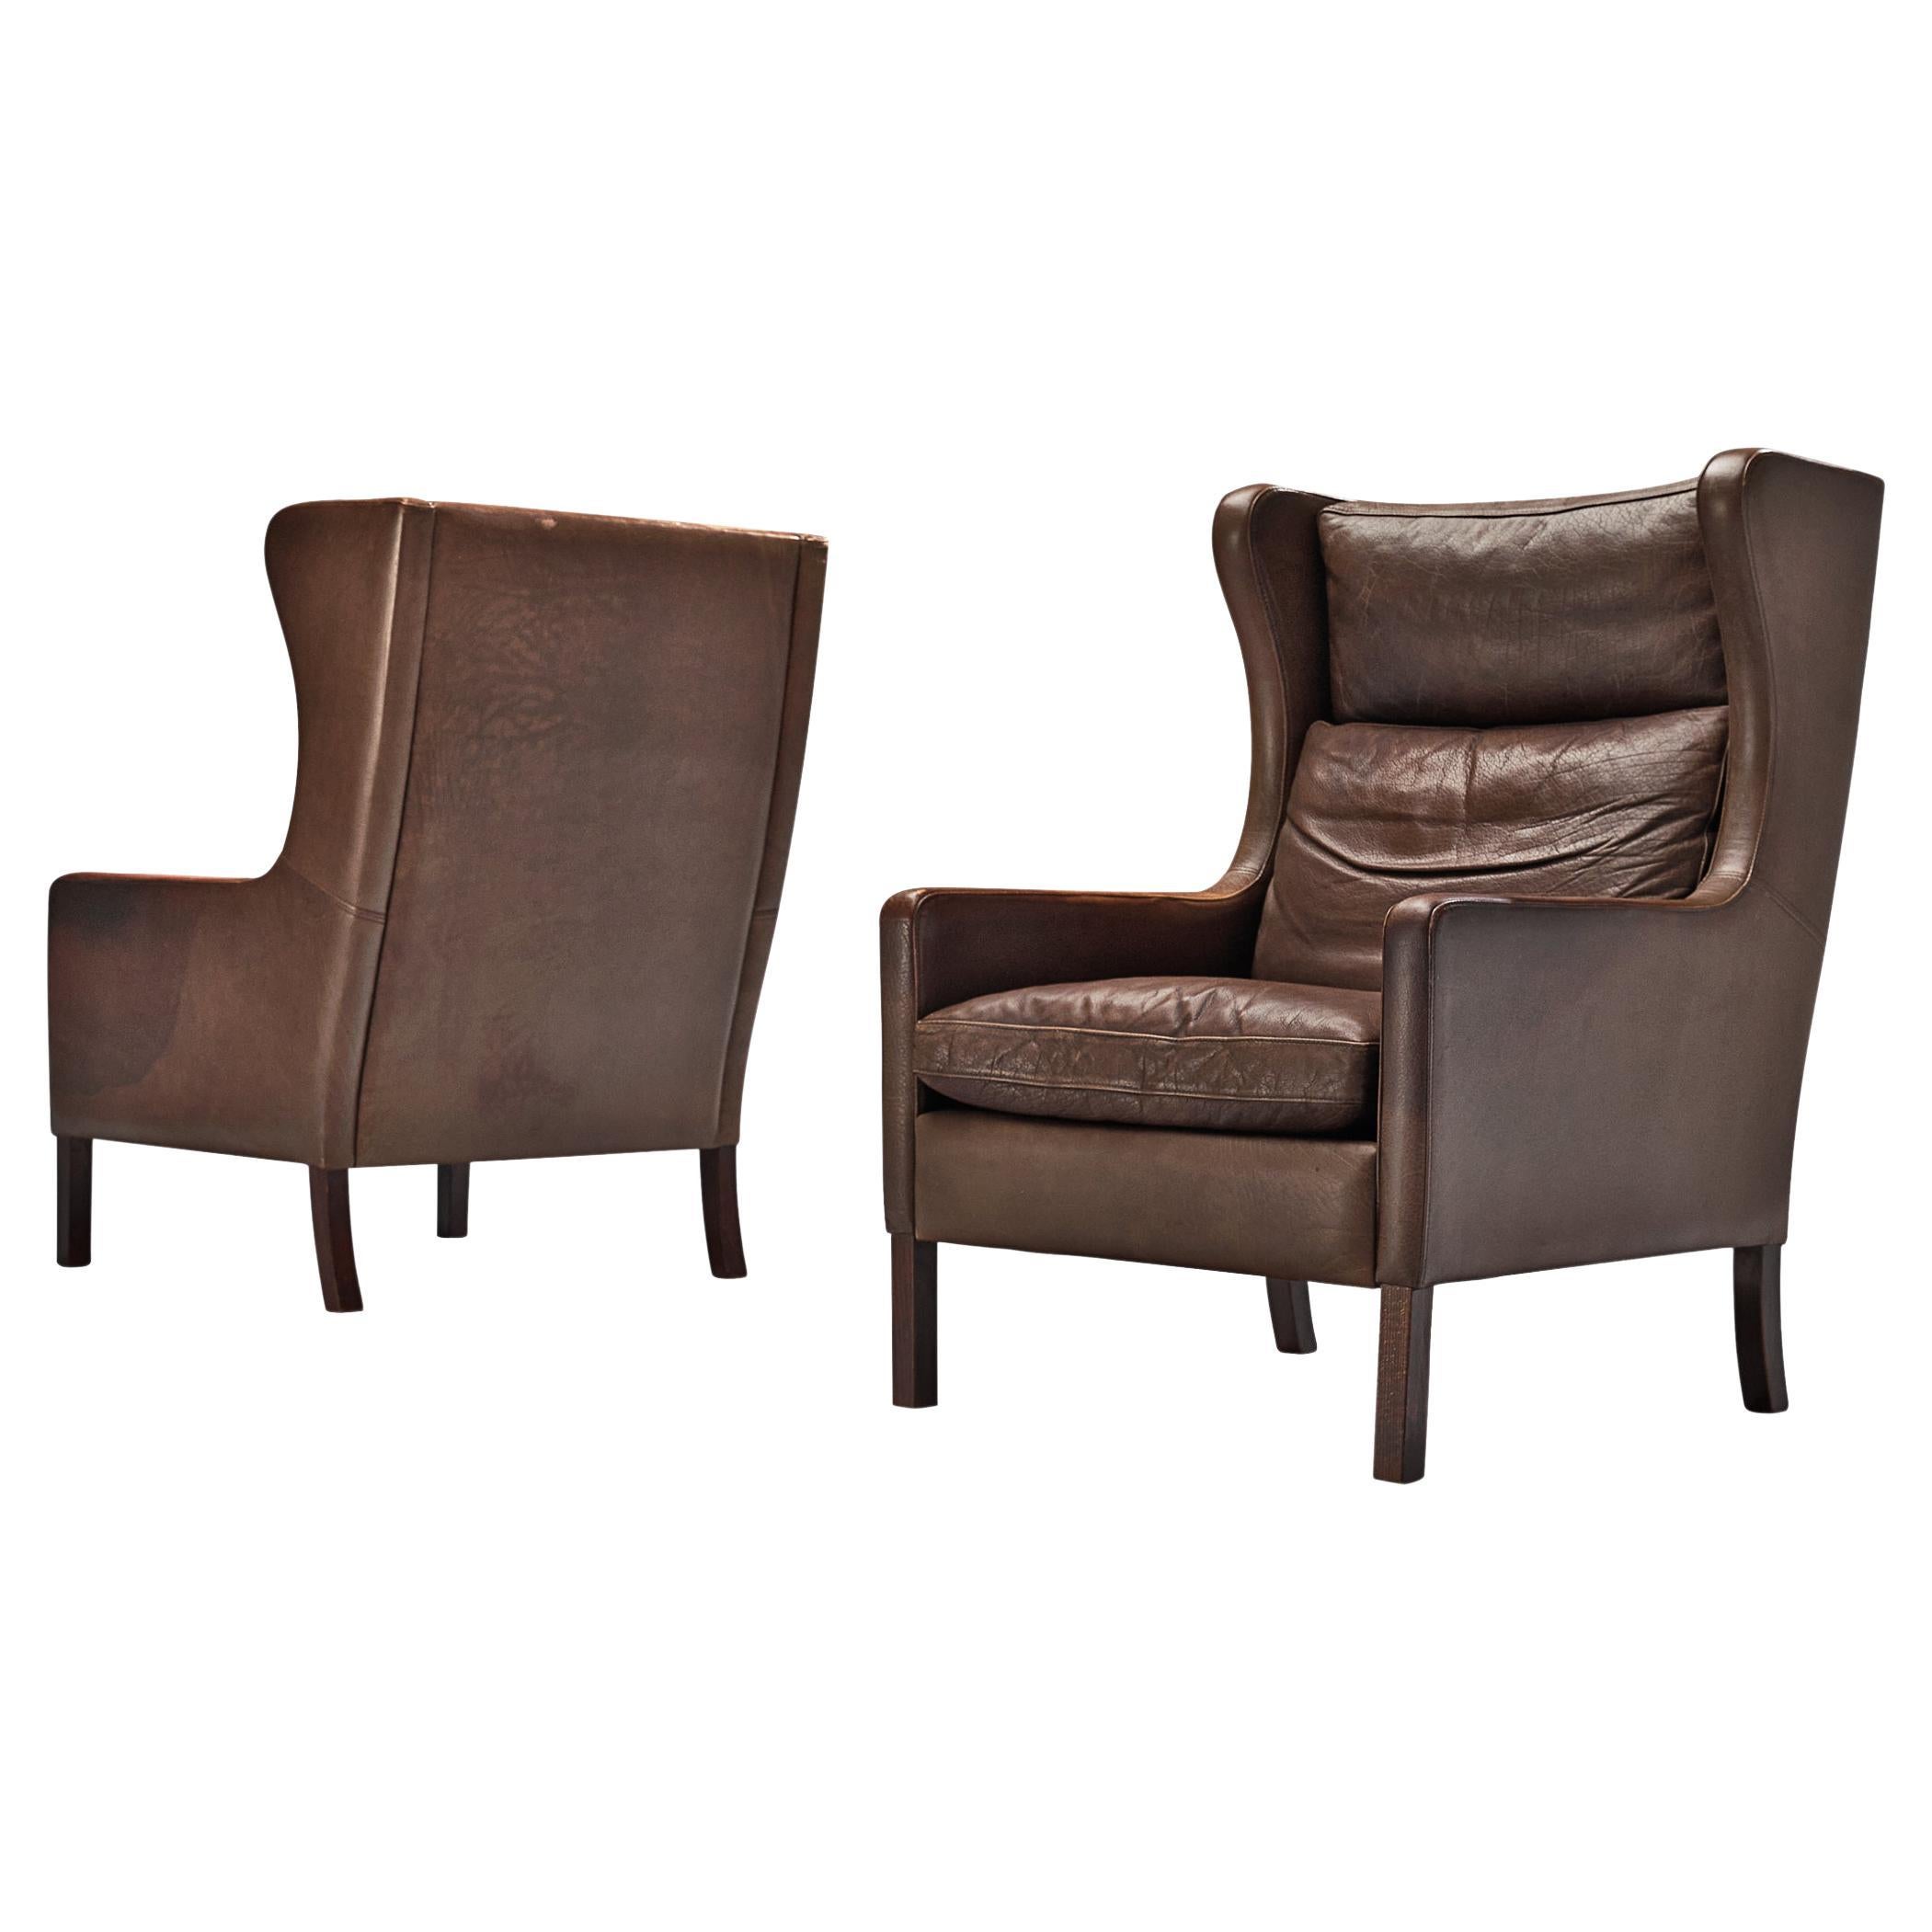 Pair of Stouby Denmark Lounge Chairs in Dark Brown Leather